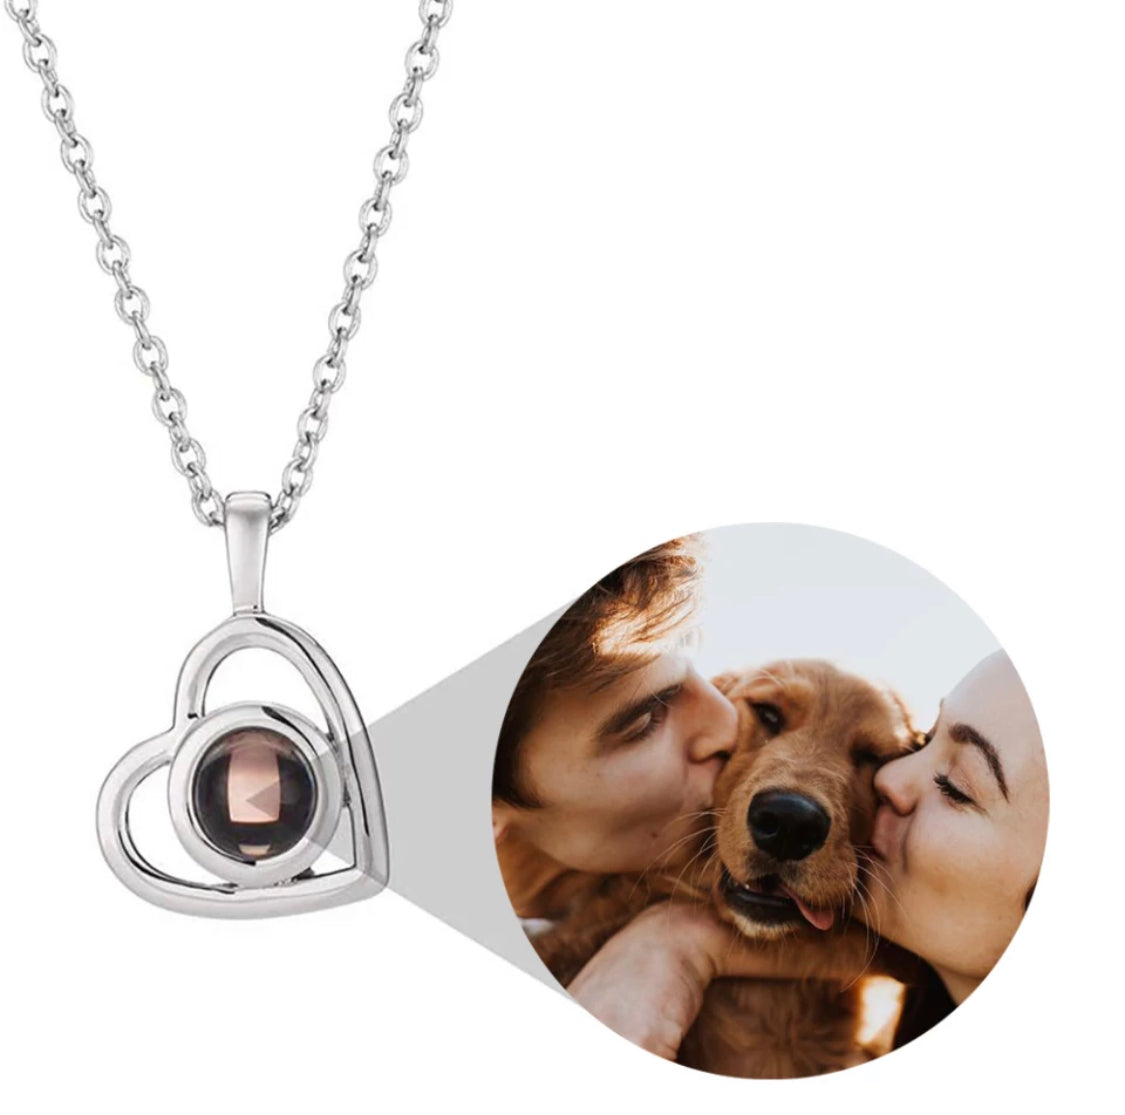 The photo projection necklace 3d